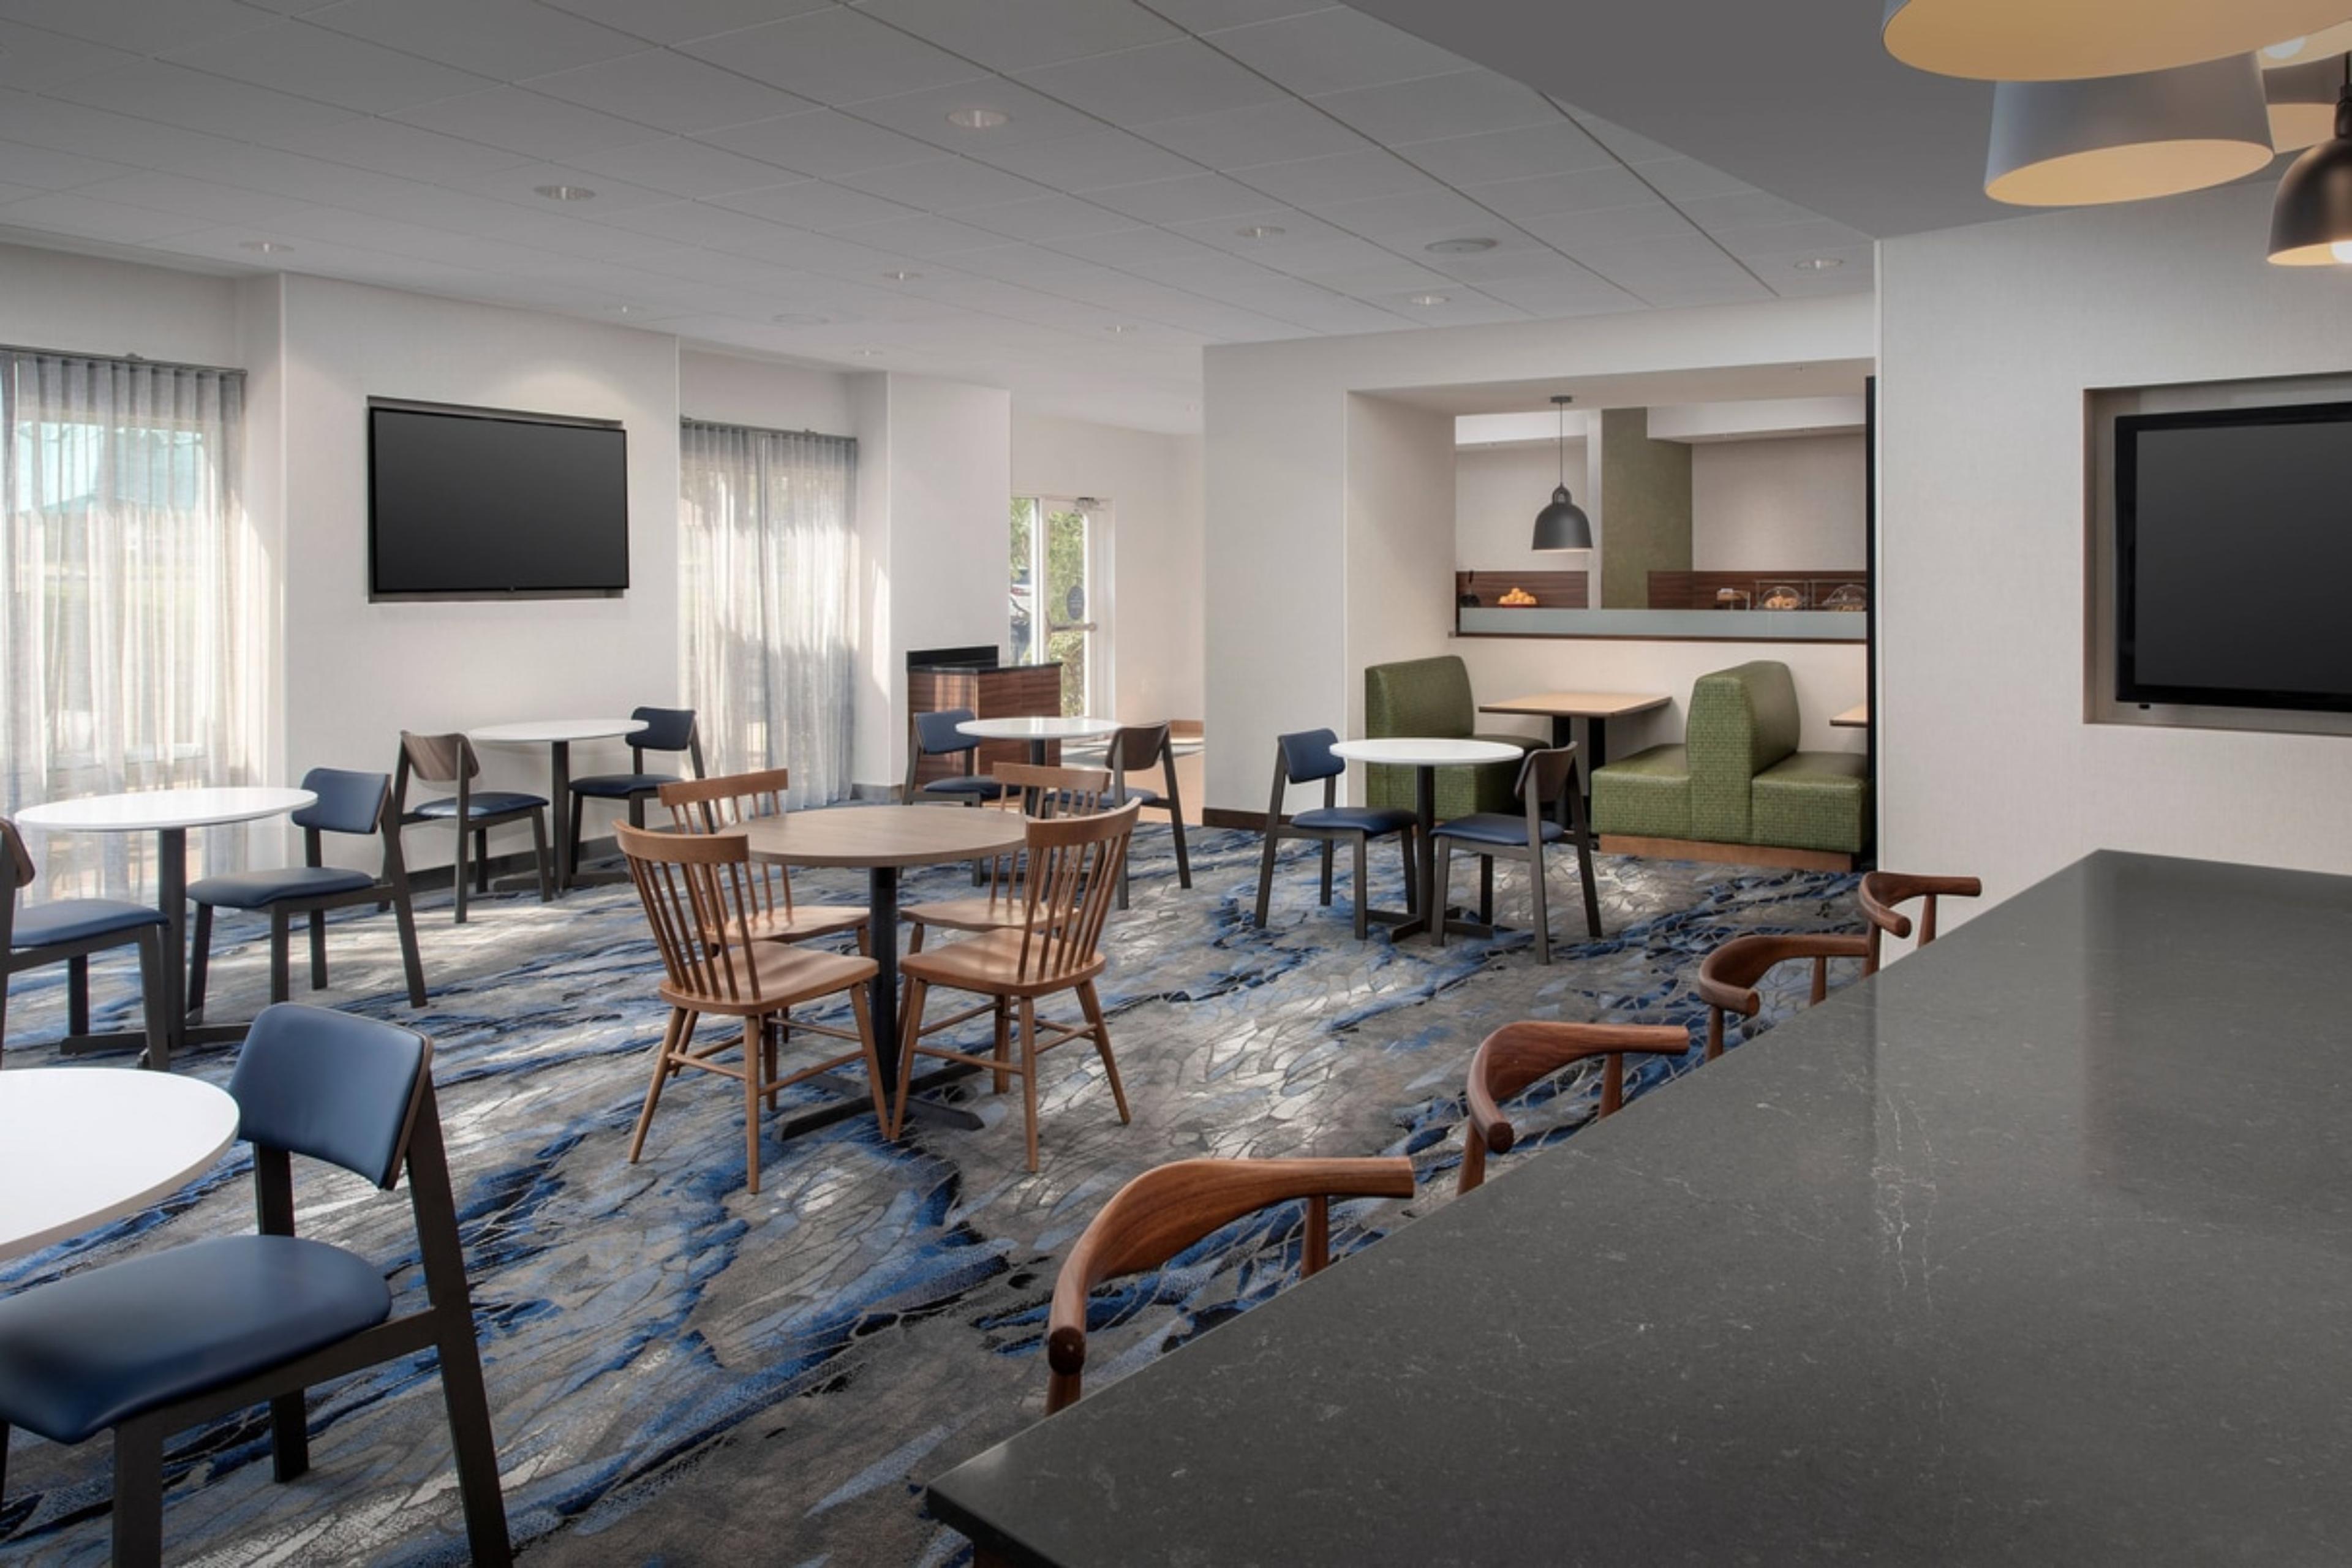 Fairfield Inn & Suites by Marriott Baltimore BWI Airport